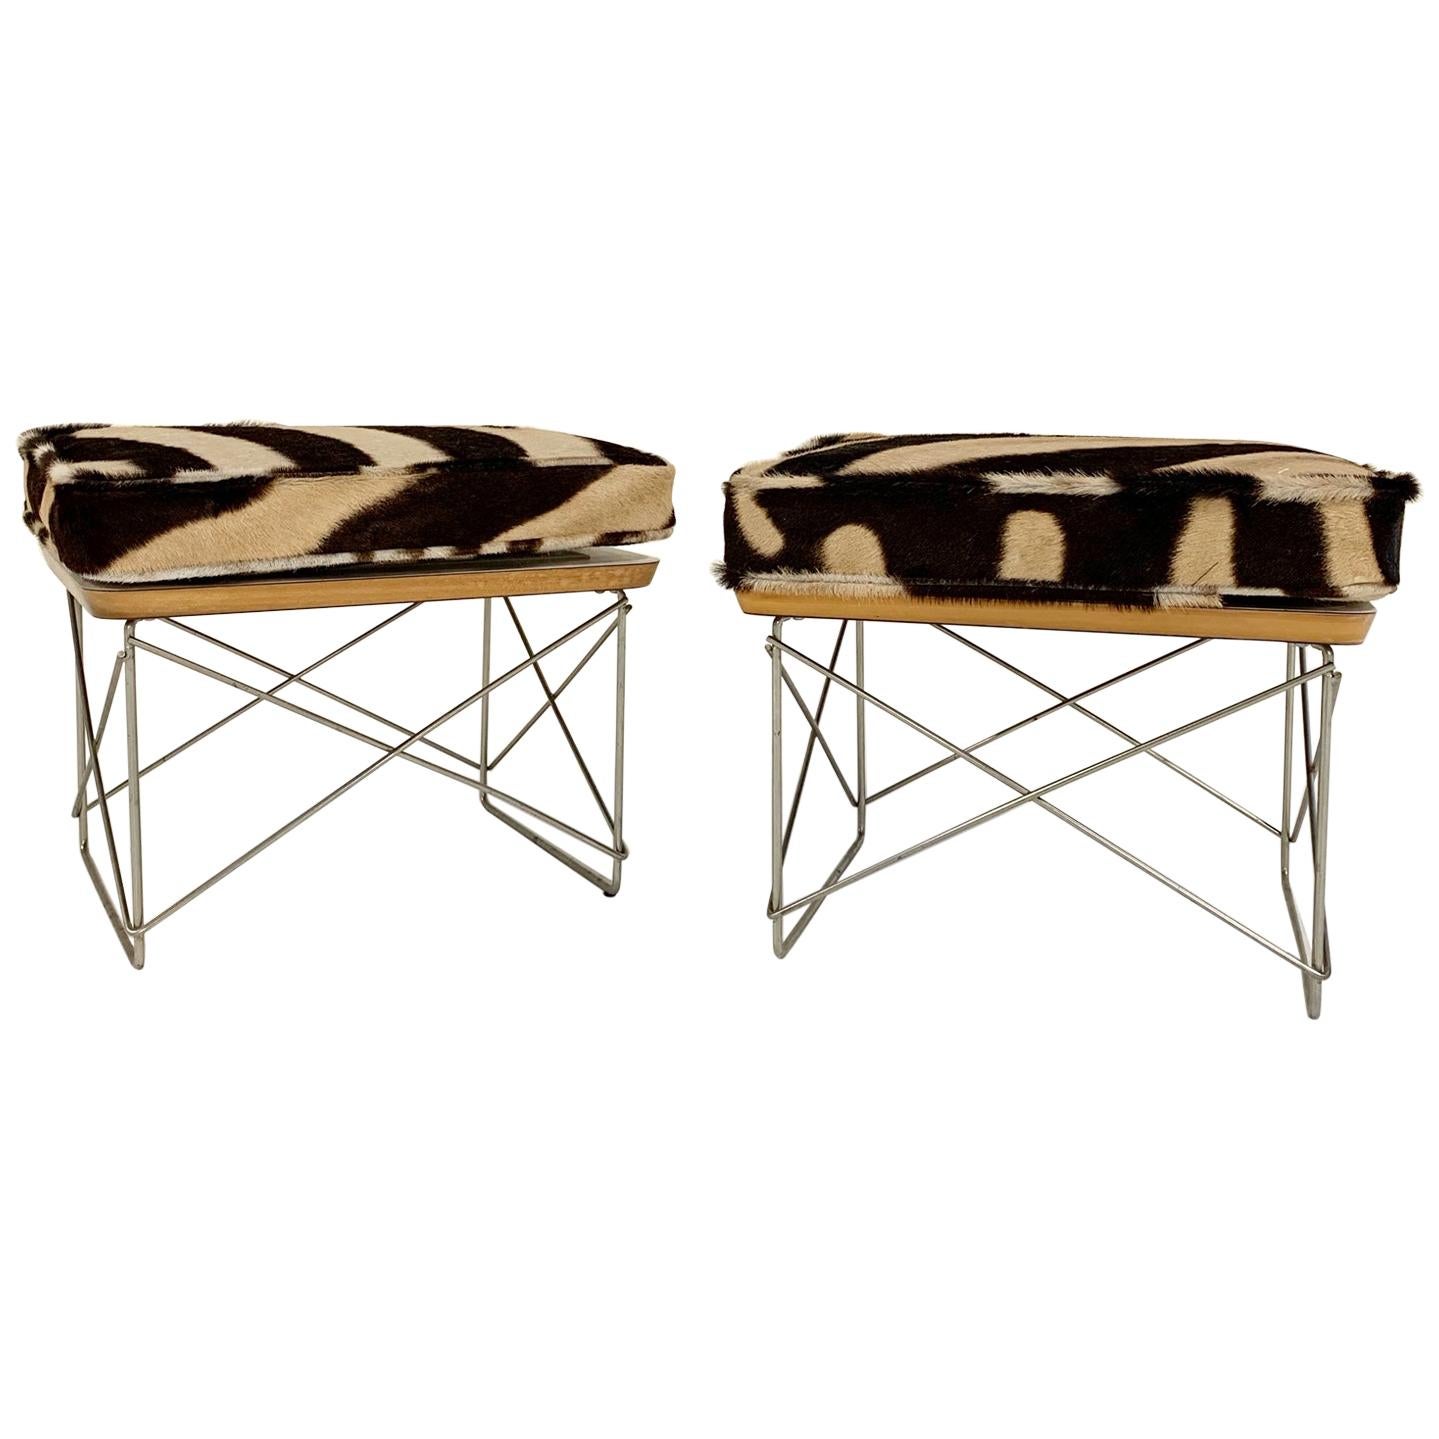 Charles and Ray Eames Ltr Tables with Zebra Cushions, Pair